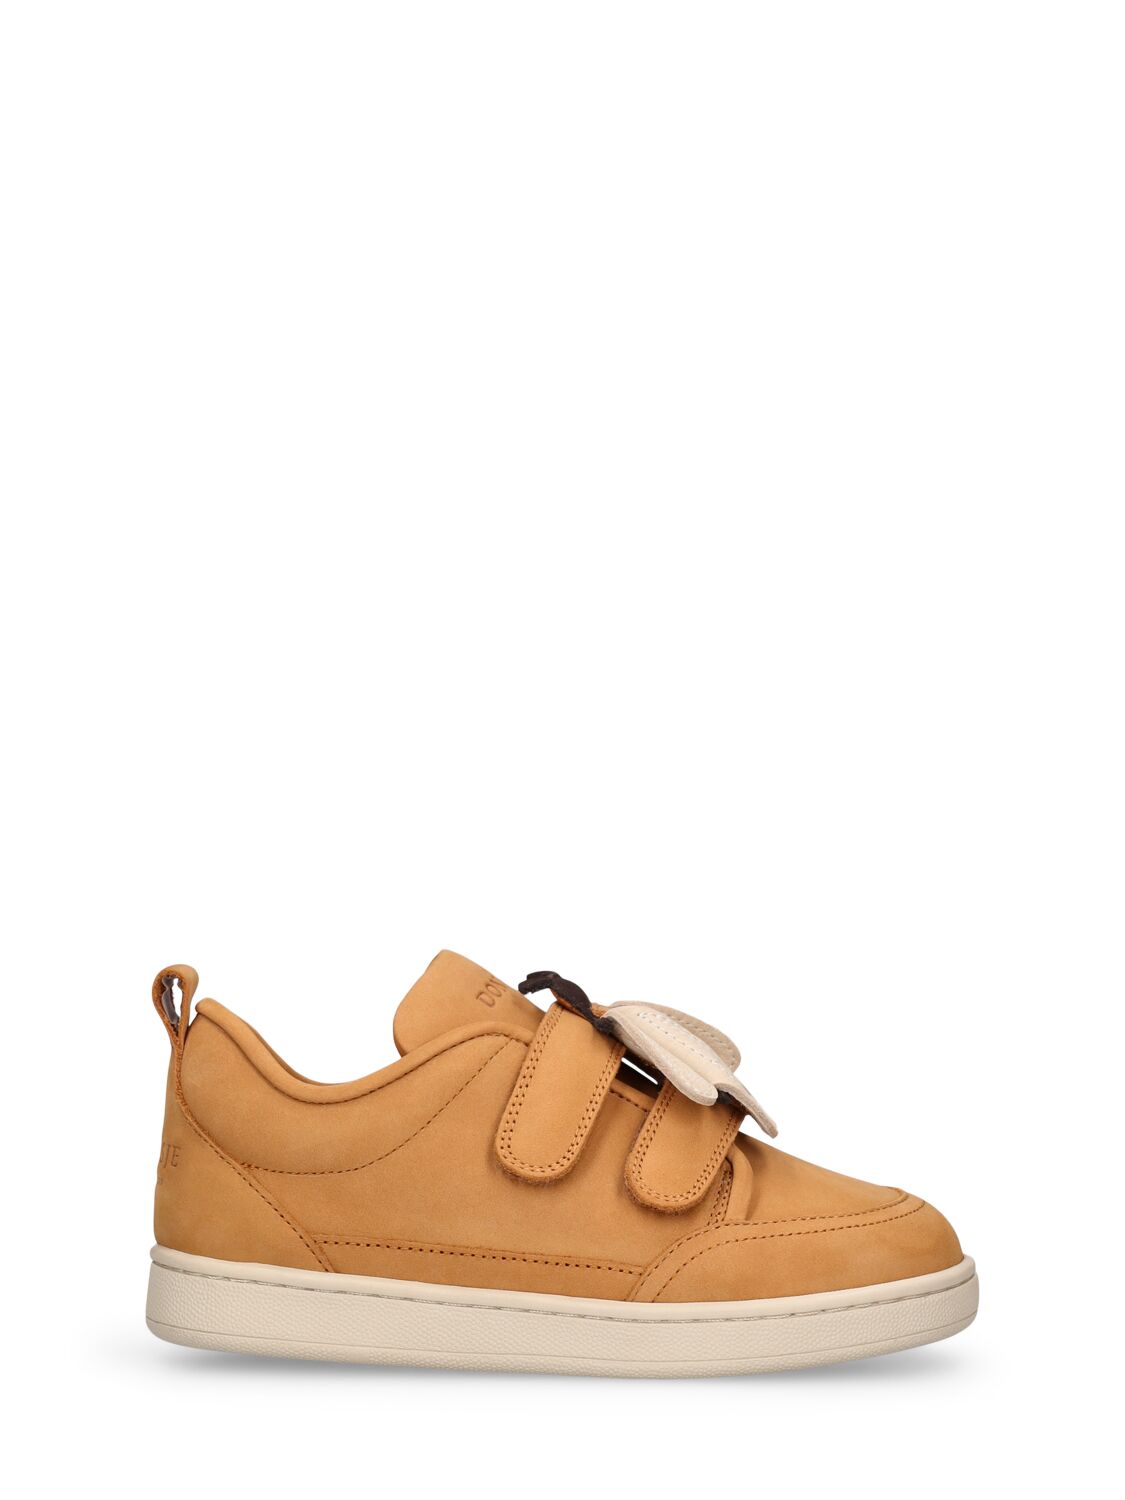 Image of Leather Strap Sneakers W/ Bee Patch